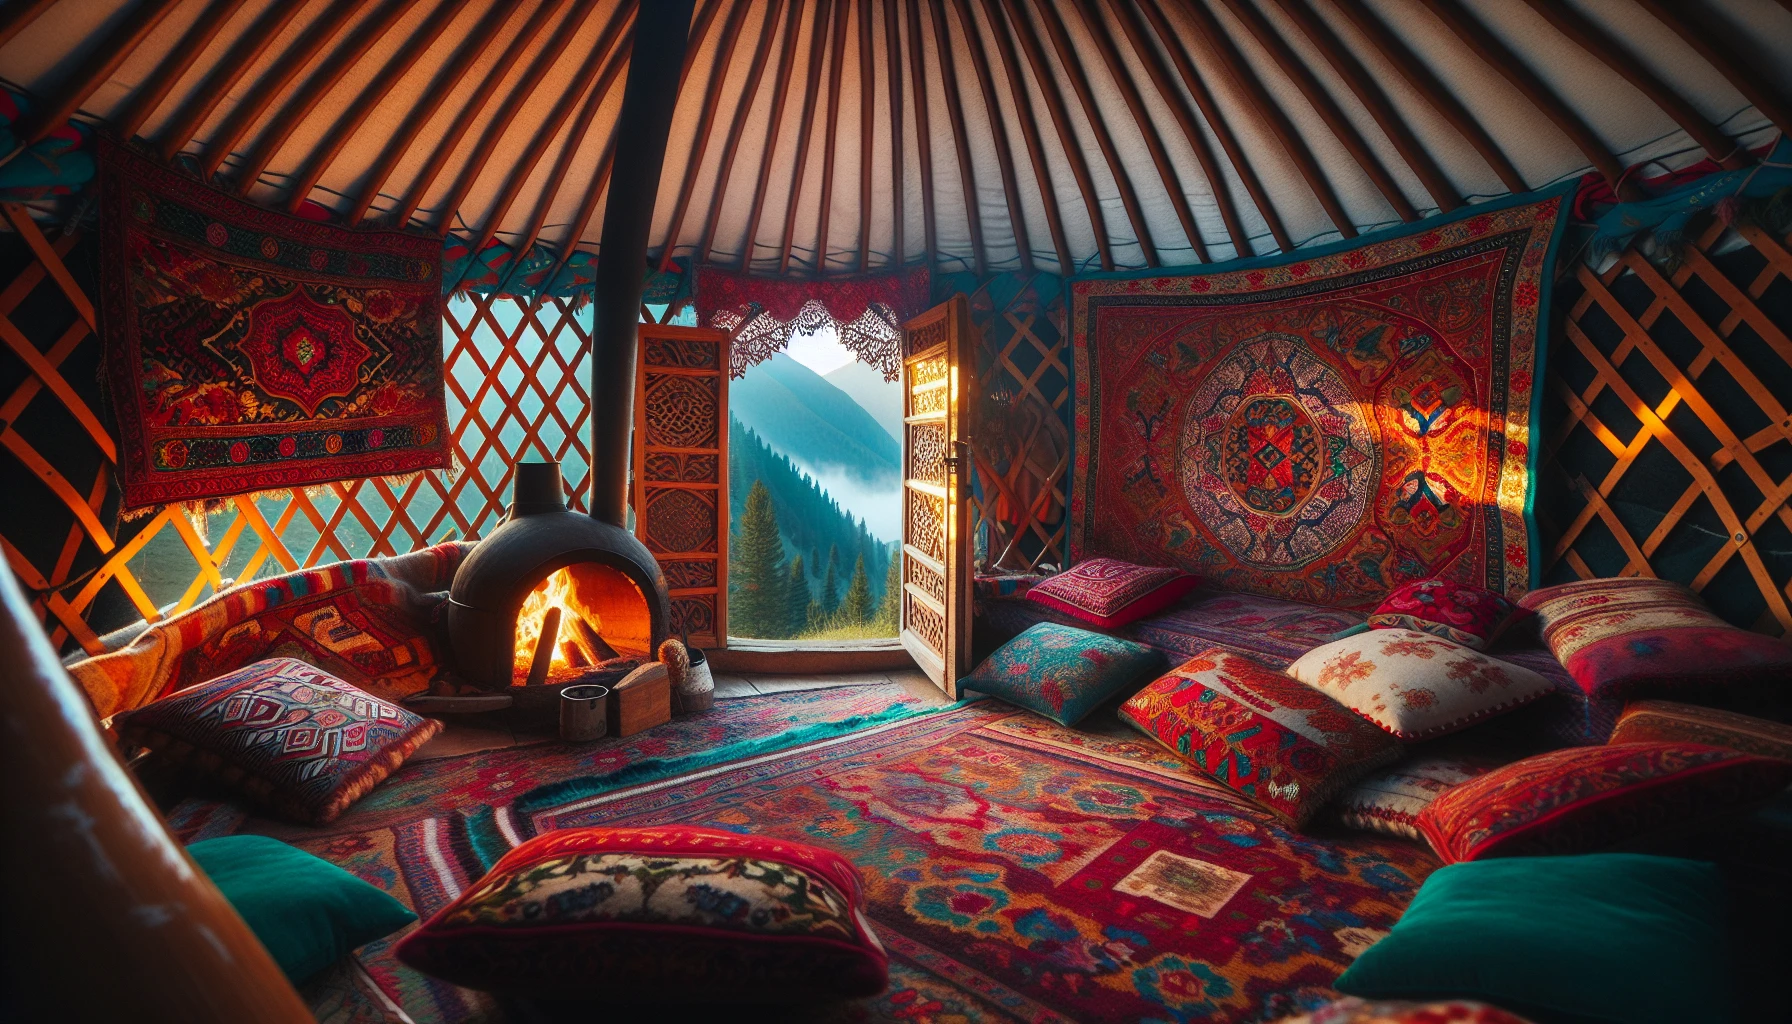 Cozy interior of a colorful Kazakh yurt in the Altai Mountains